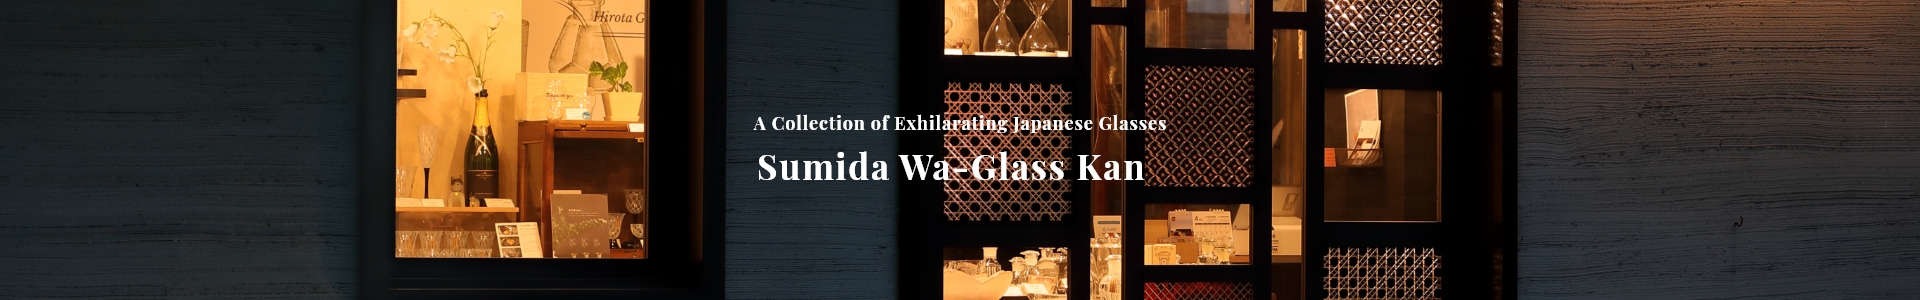 A Collection of Exhilarating Japanese Glasses Sumida Wa-Glass Kan